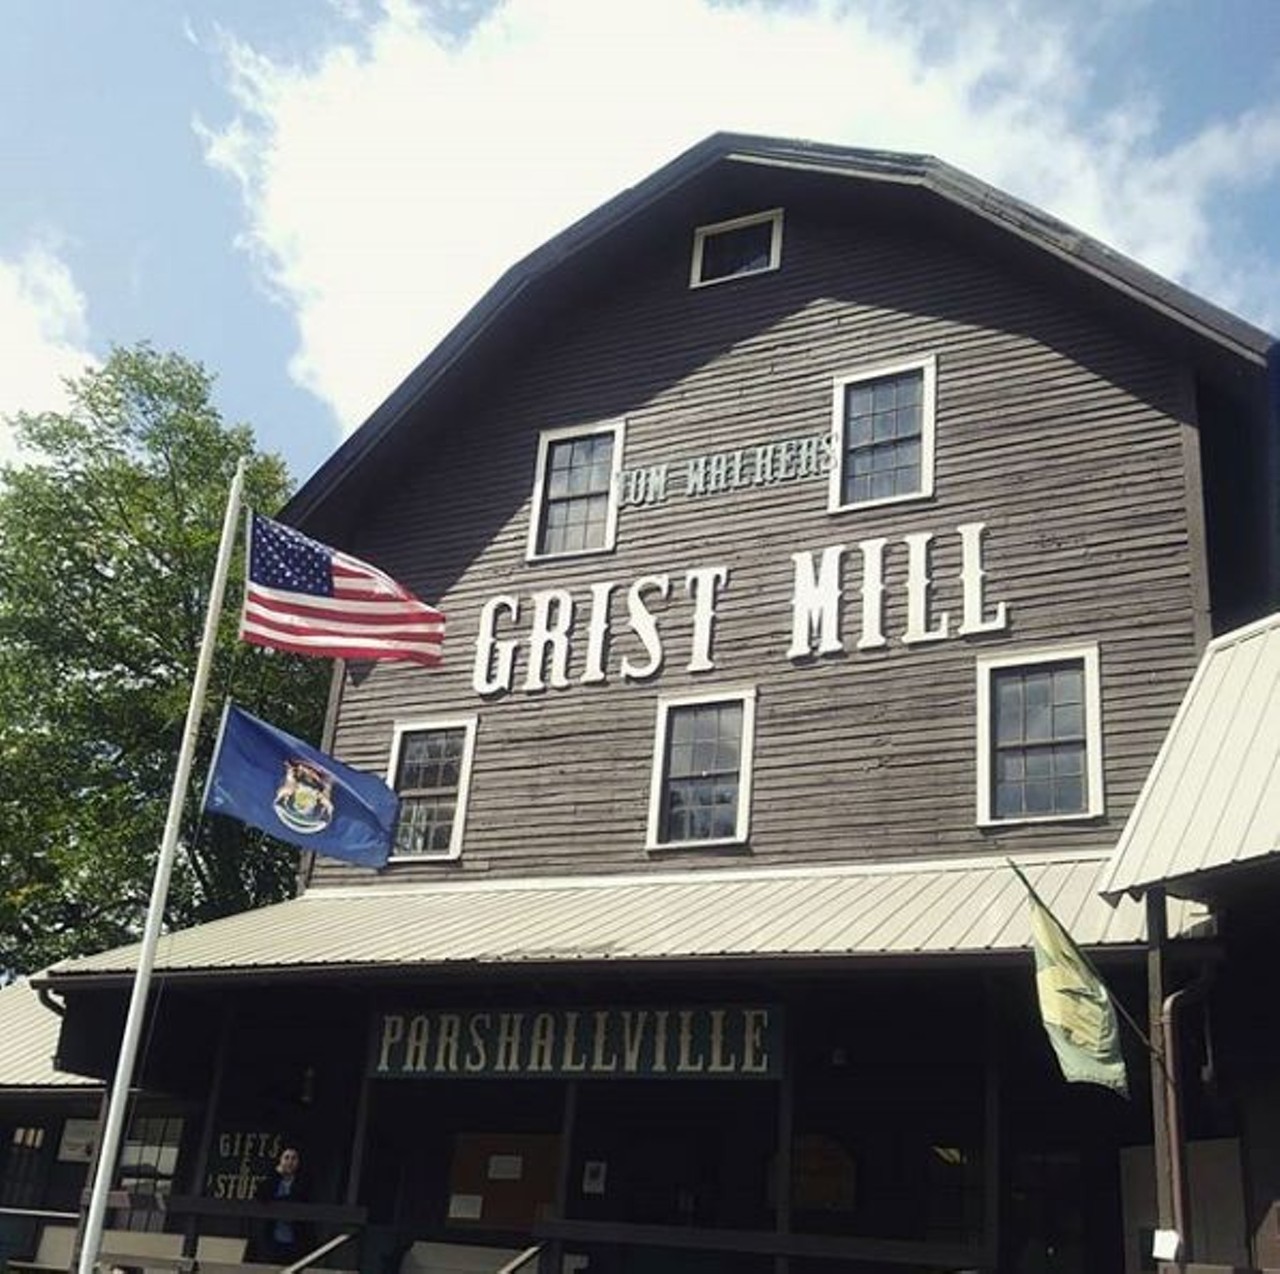 Historic Parshallville Grist Mill 
8507 Parshallville Rd., Fenton; 810-629-9079; parshallvillecidergristmill.com 
A &#147;Michigan Historic Site,&#148; the 143-year-old mill is one of few water-powered mills left in the state. They make cider, donuts, caramel apples and homemade apple pie. Their cider is personally heralded as being made the &#147;old-fashioned way&#148; creating a different taste depending on available apples every time. Photo via @shelbss_baylls. 